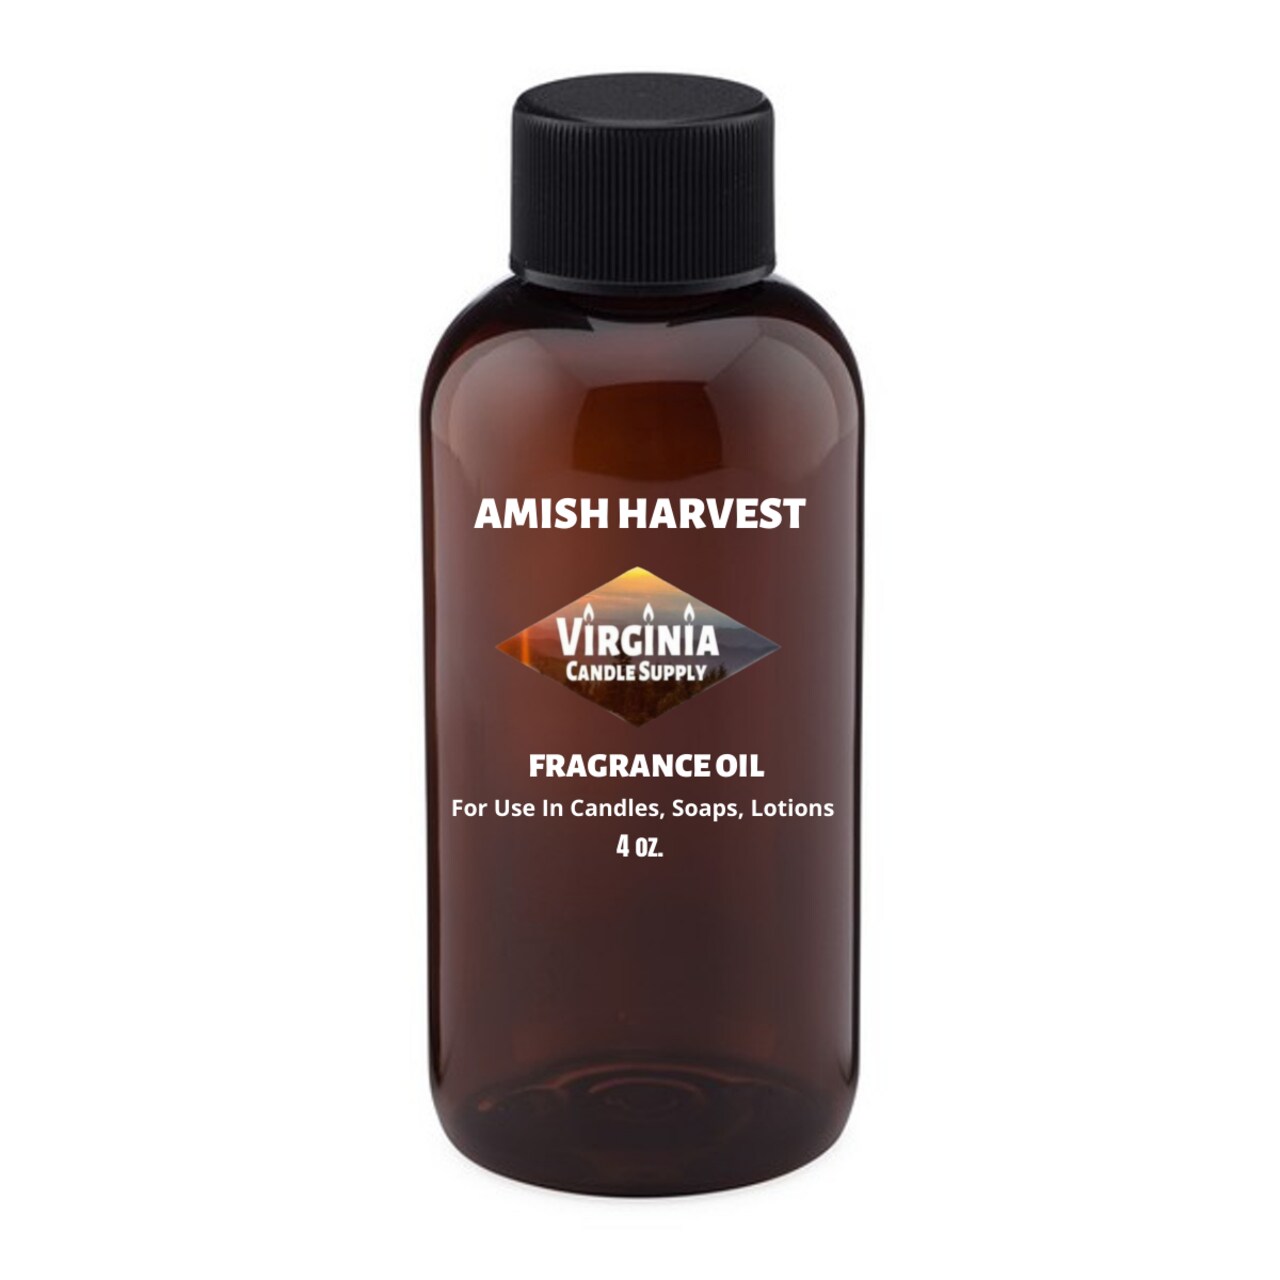 Amish Harvest Fragrance Oil (4 oz Bottle) for Candle Making, Soap Making,  Tart Making, Room Sprays, Lotions, Car Fresheners, Slime, Bath Bombs,  Warmers…